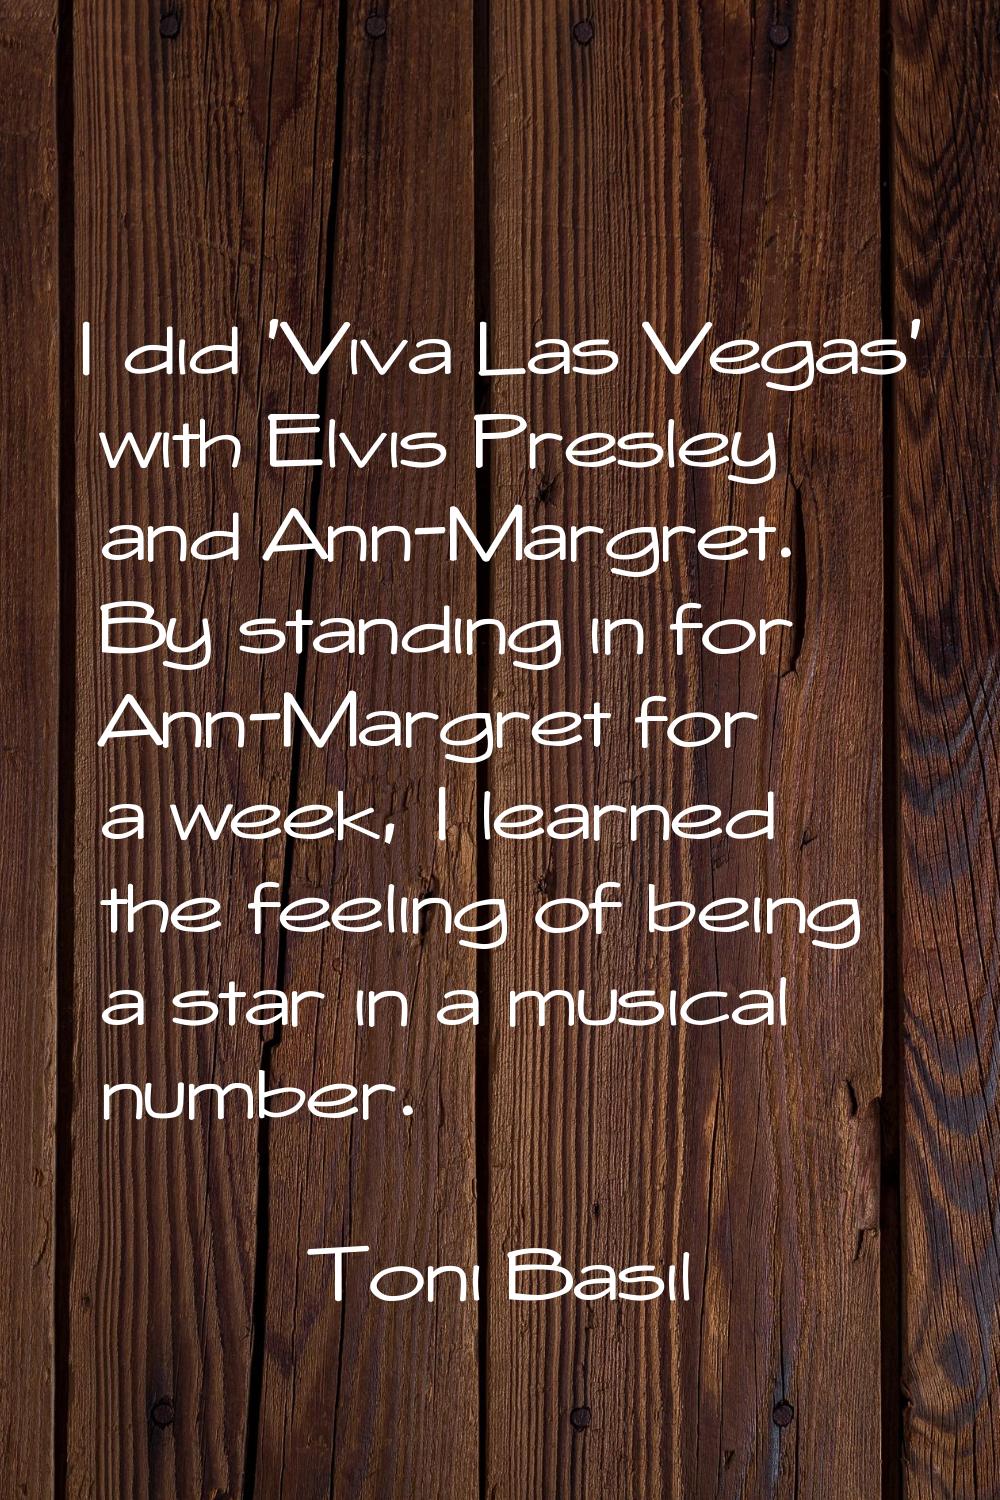 I did 'Viva Las Vegas' with Elvis Presley and Ann-Margret. By standing in for Ann-Margret for a wee